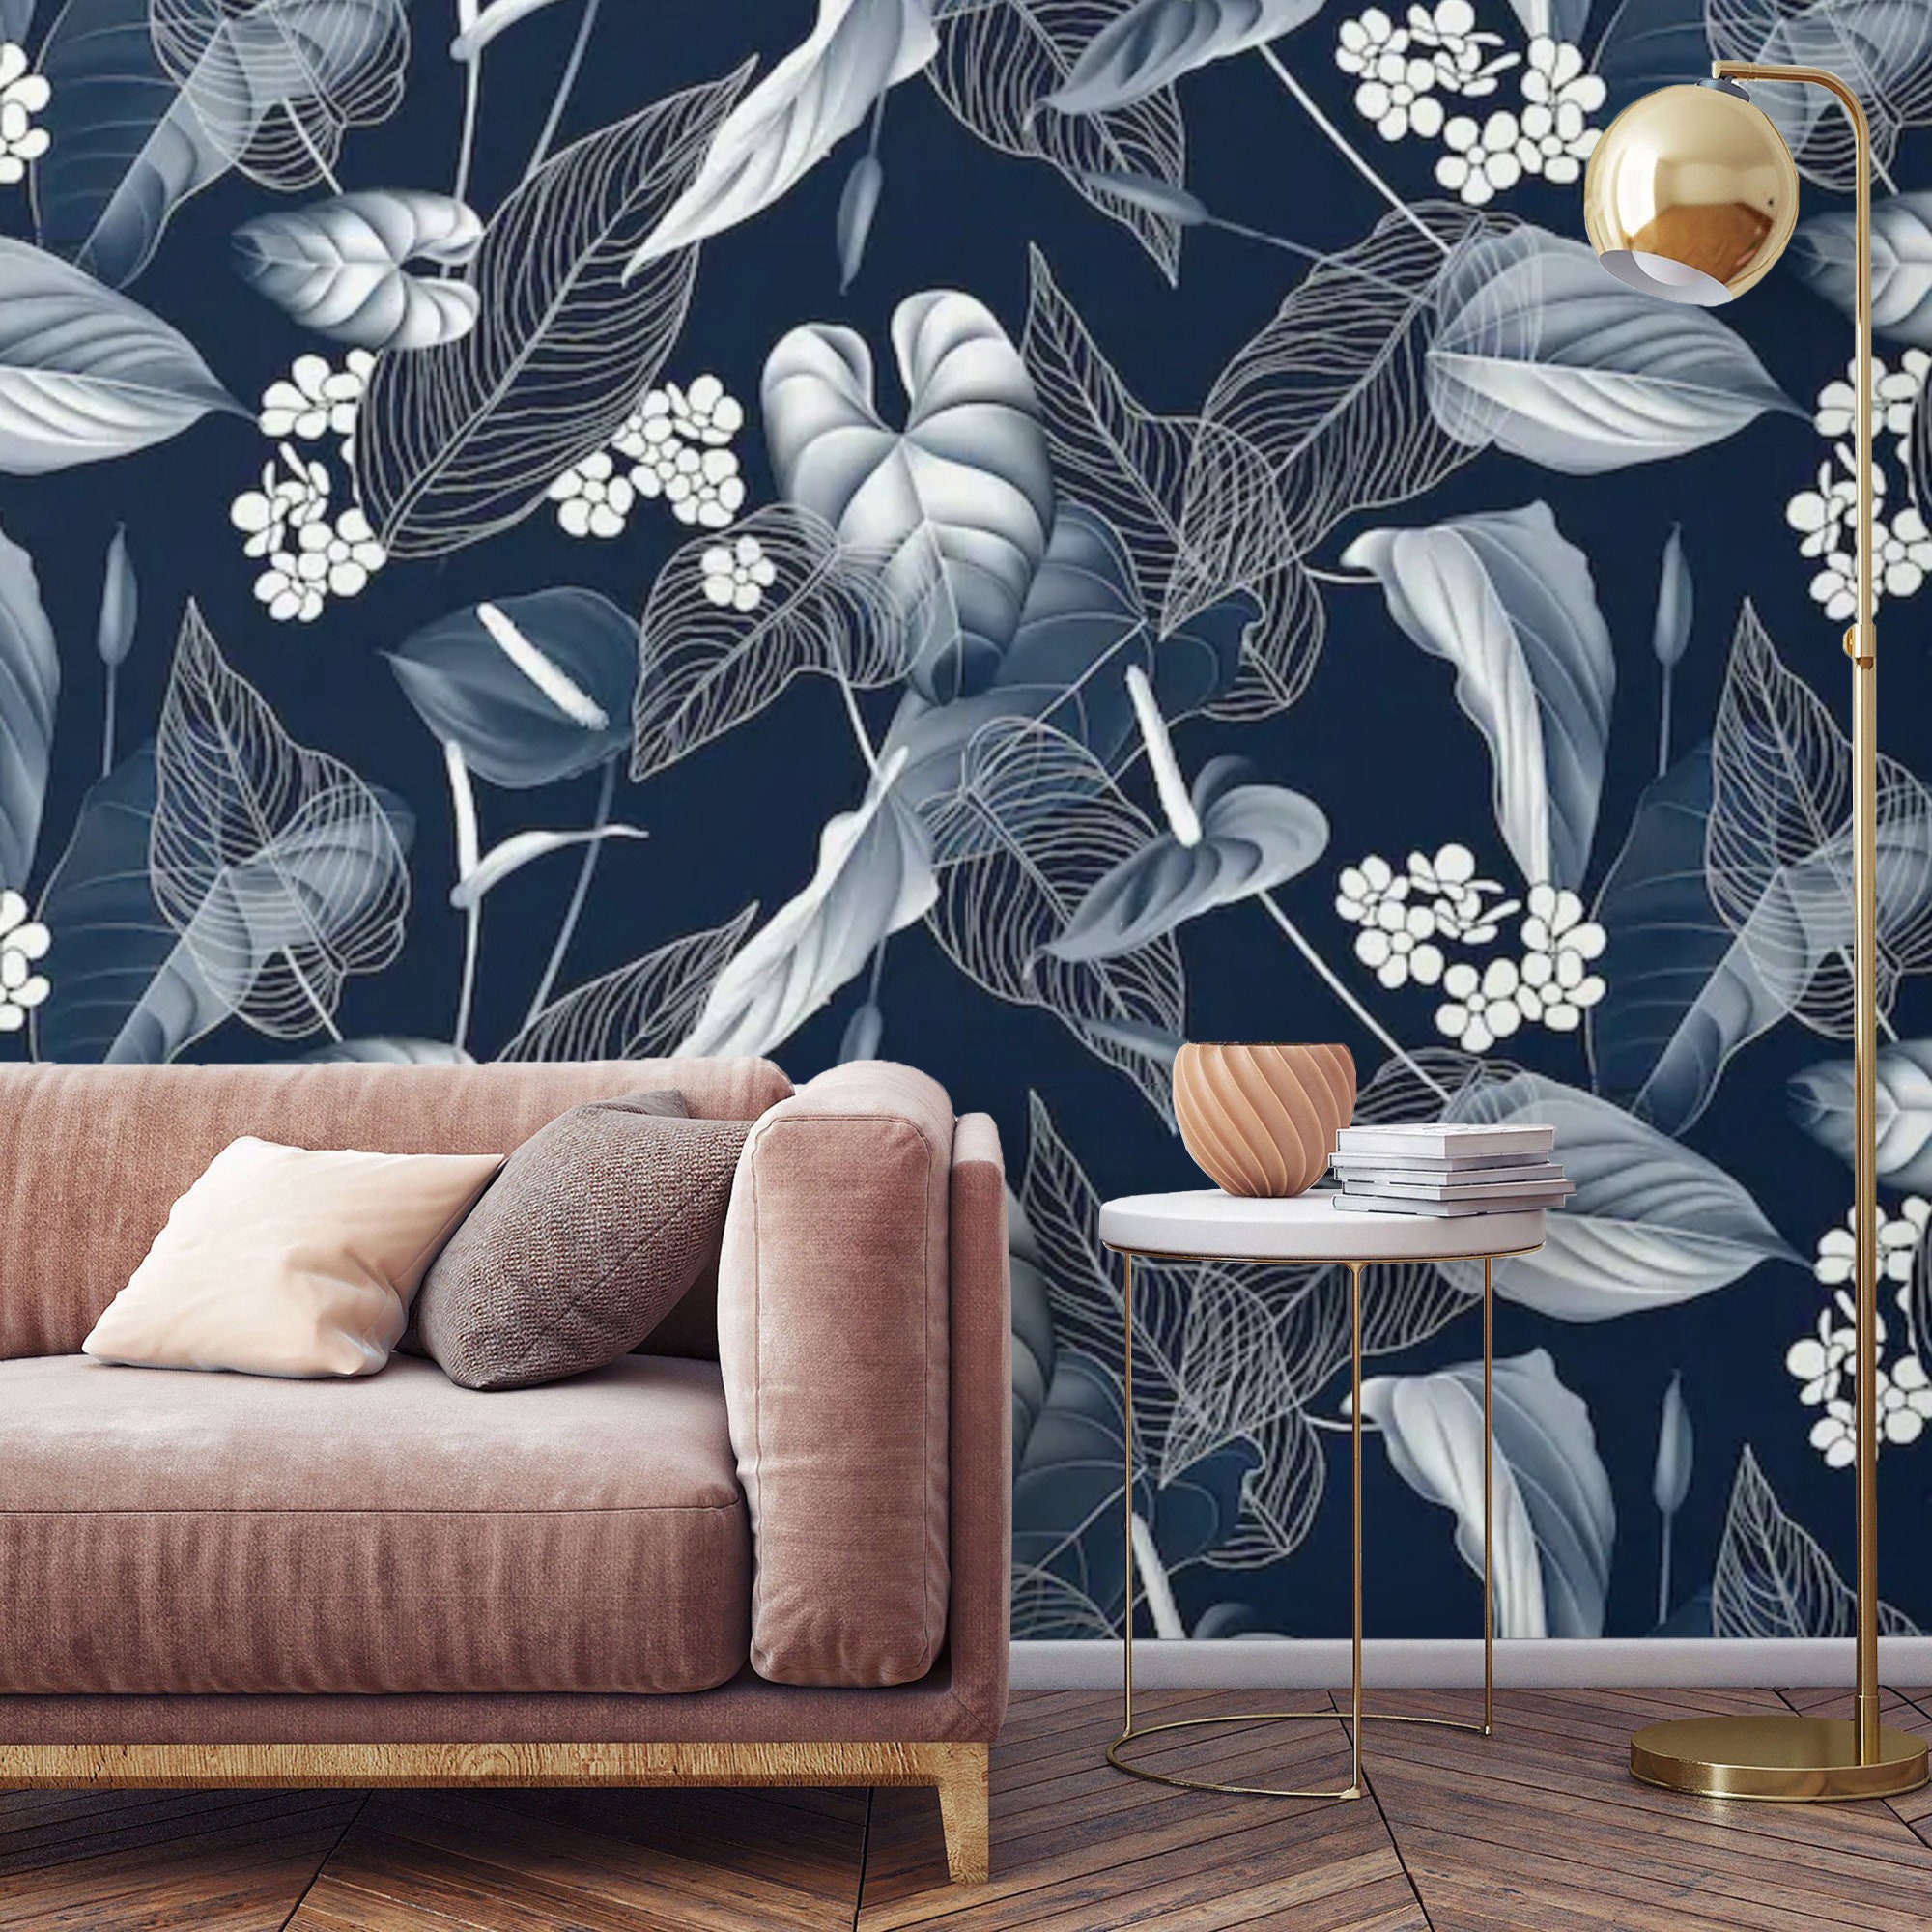 Floral Wallpaper Dark Navy Blue White Peel and Stick Wall